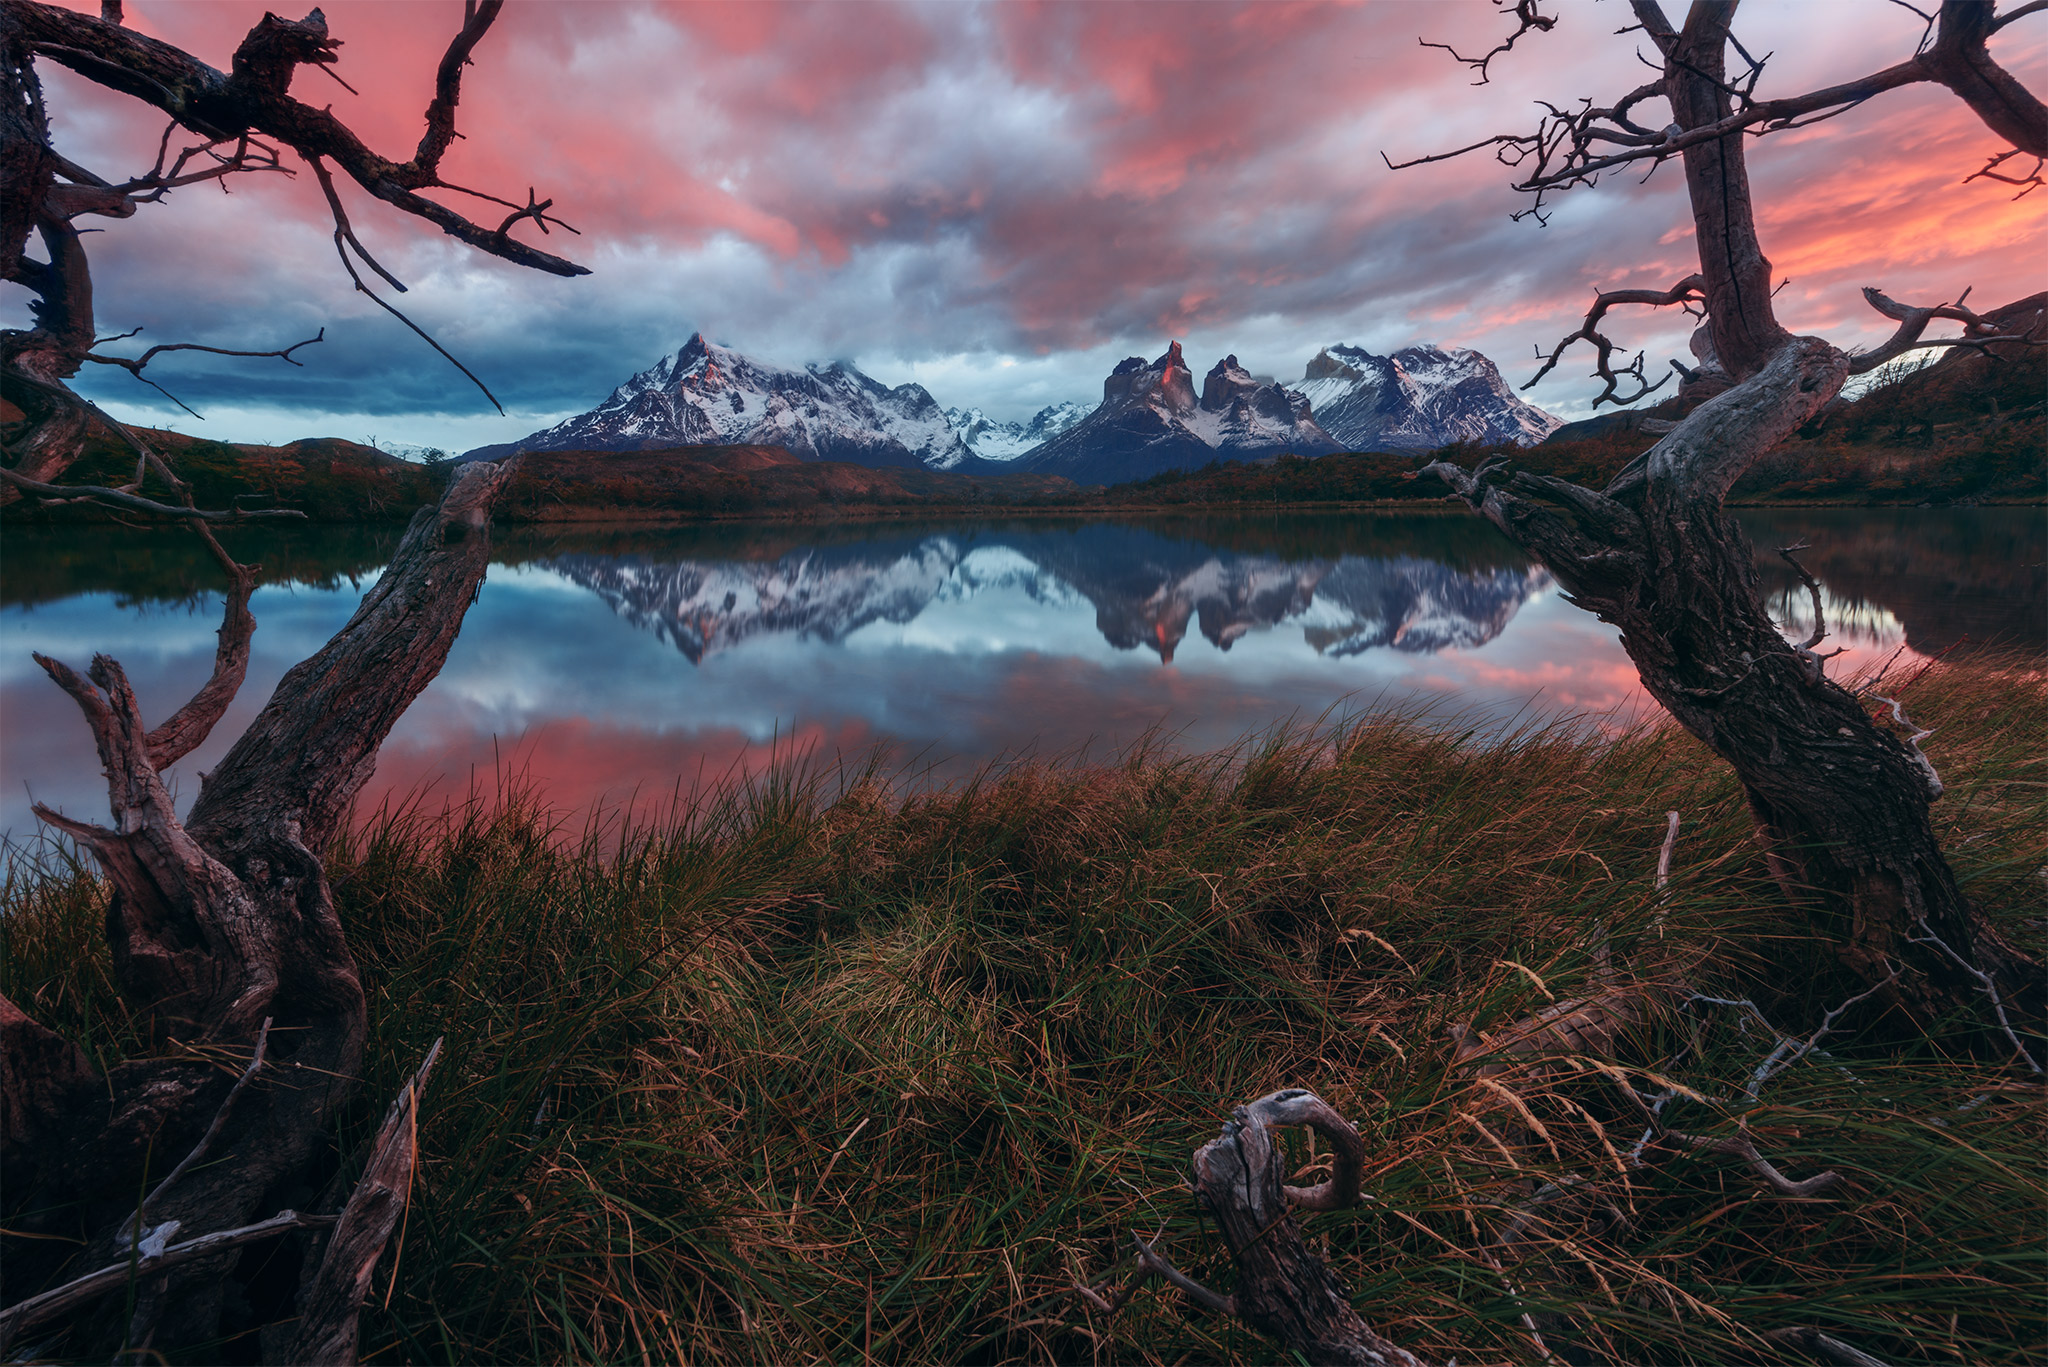 Ultimate Guide to Photography in Patagonia